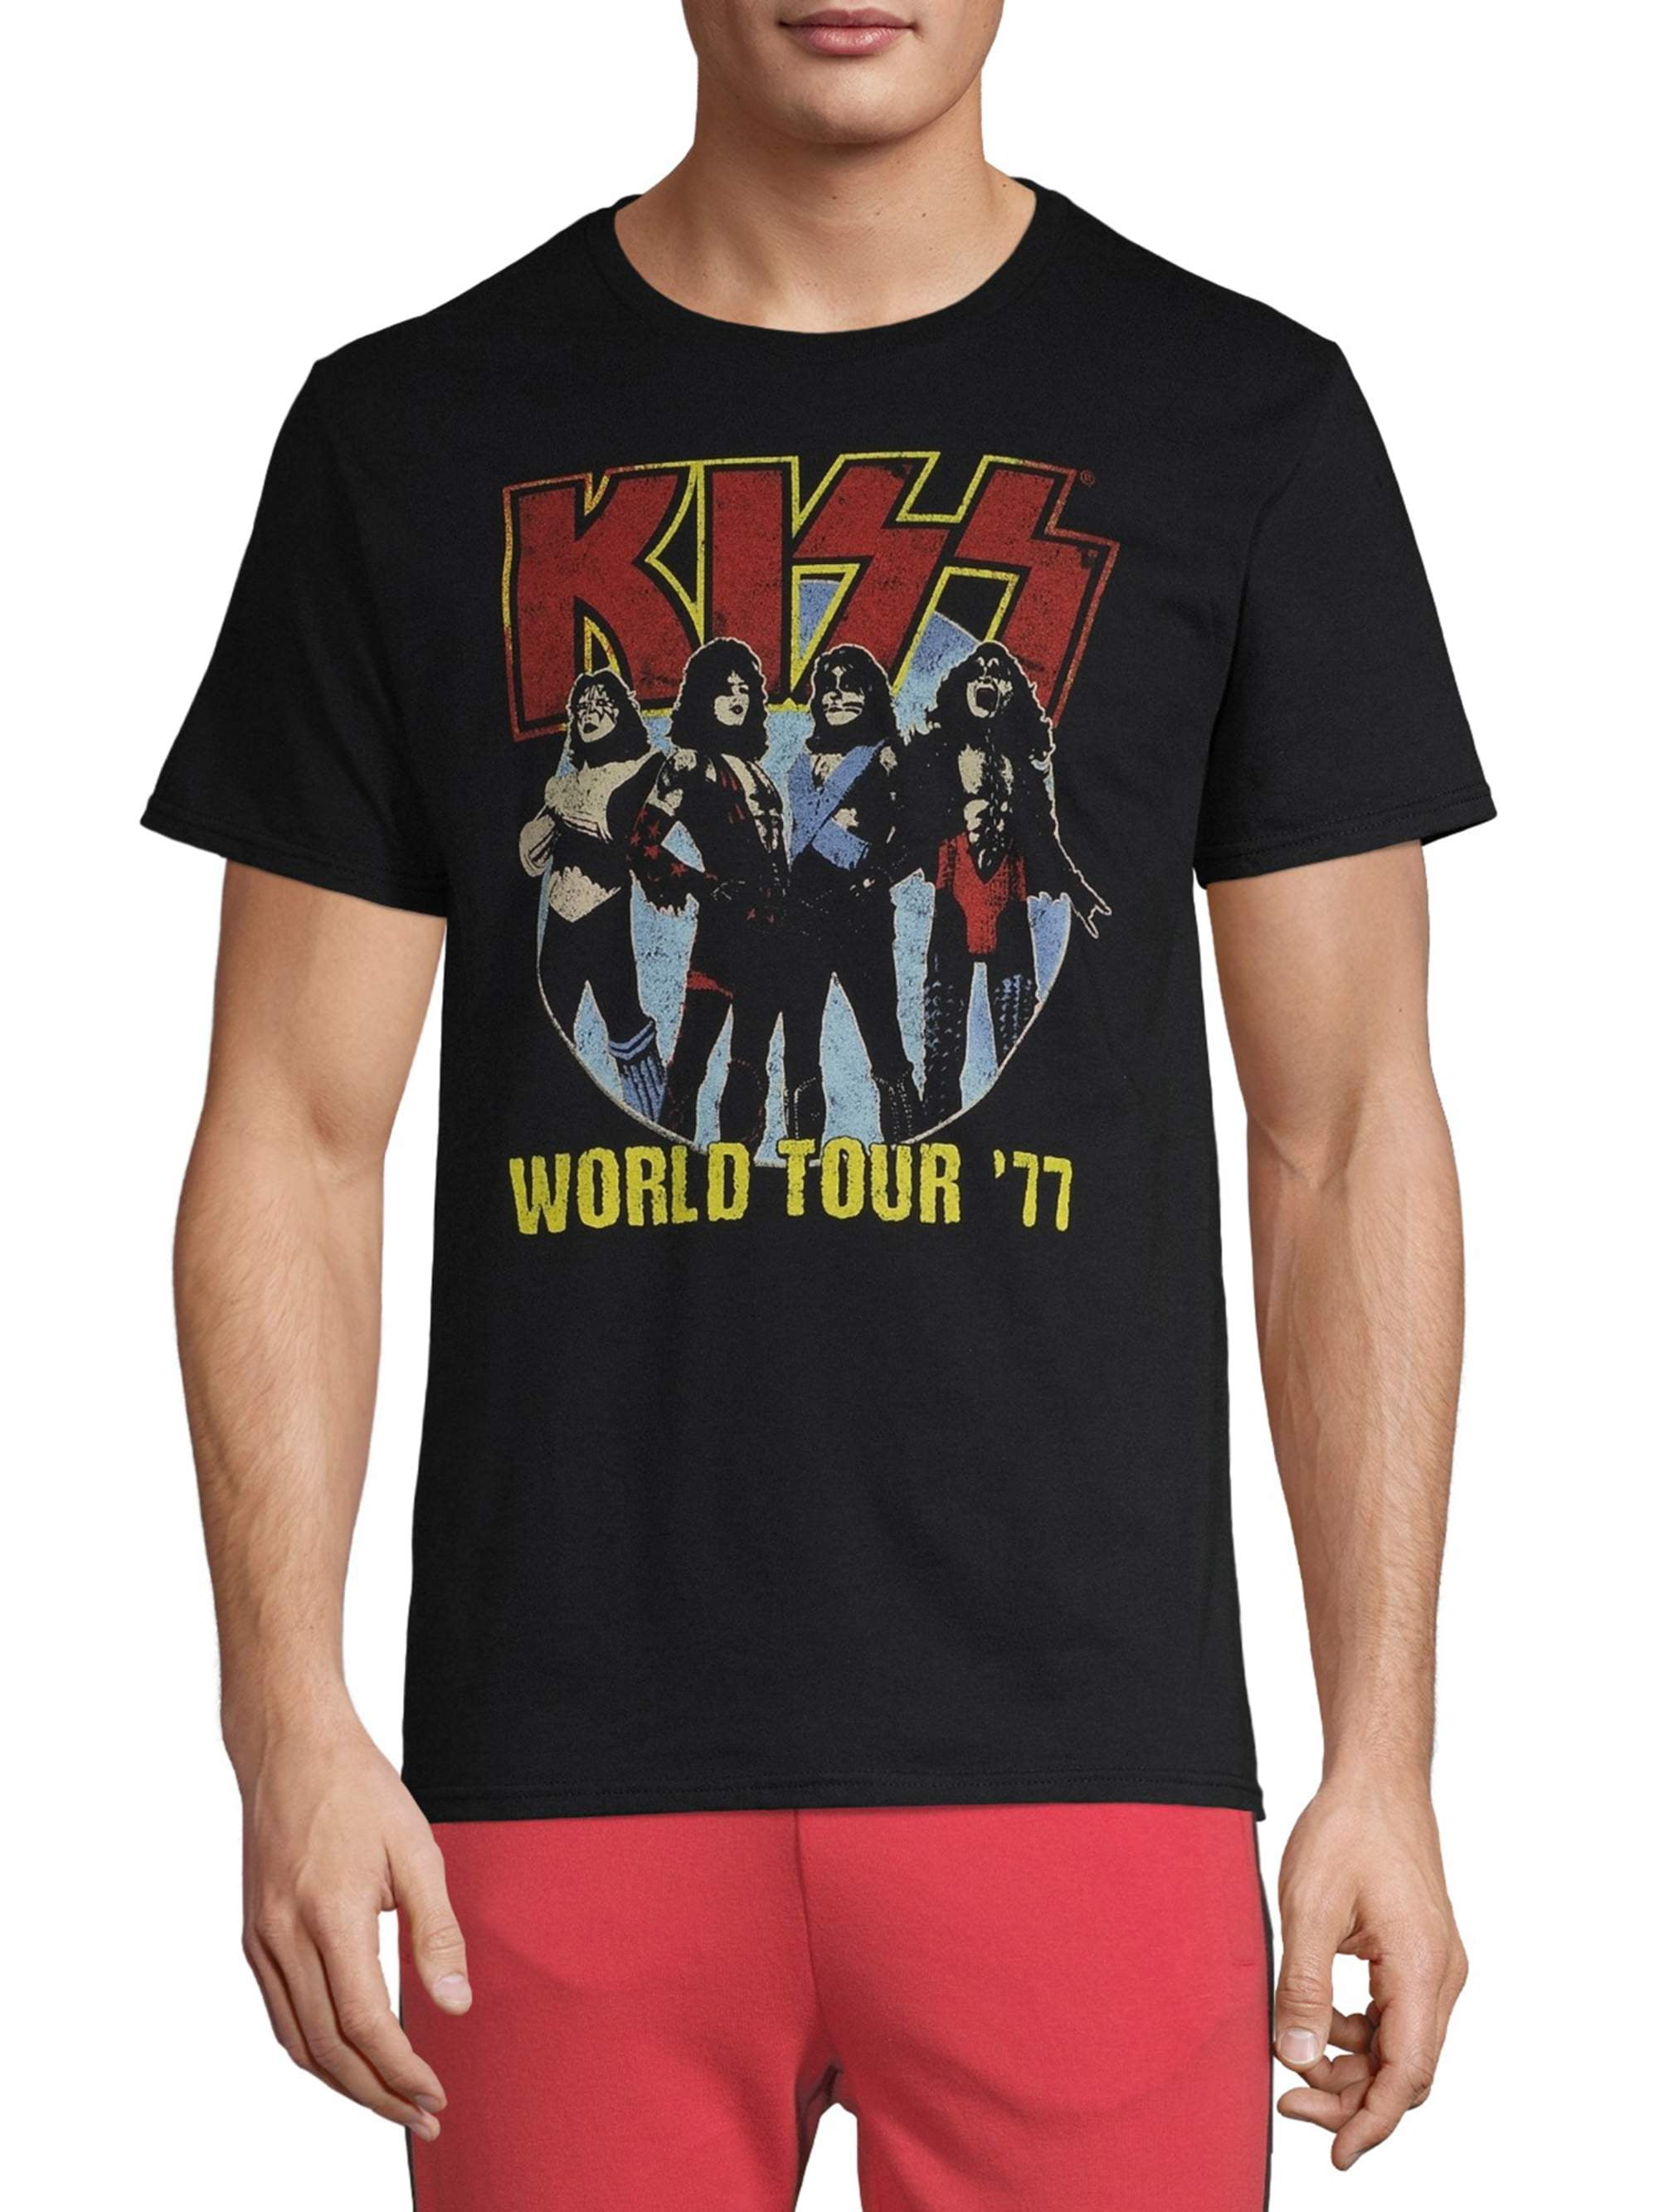 Men's Vintage KISS World Tour '77 Band Short Sleeve Graphic Tee